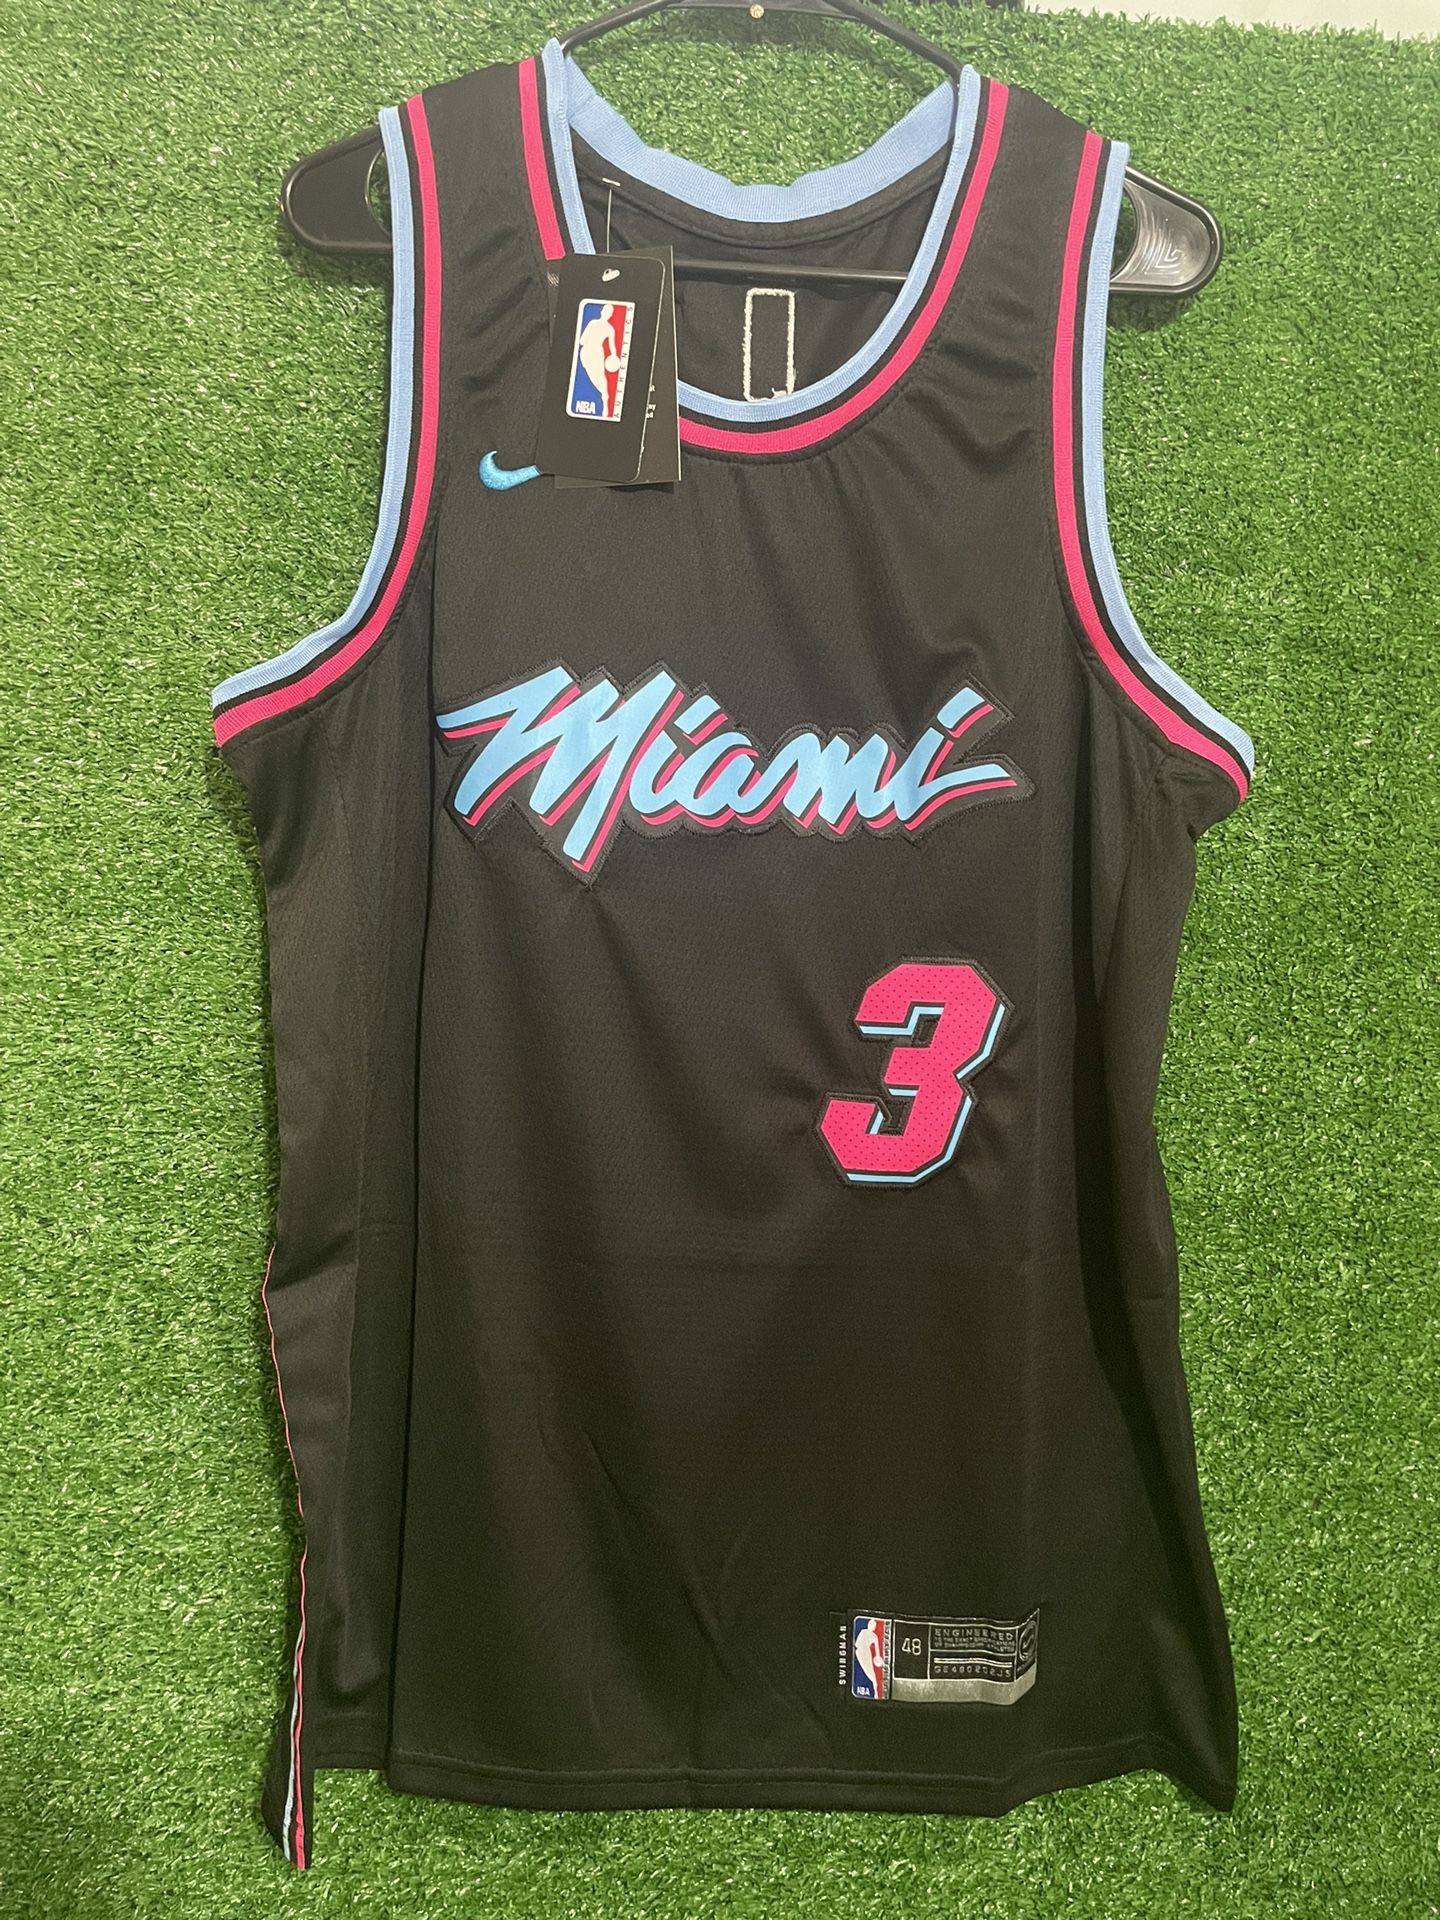 DWAYNE WADE MIAMI HEAT NIKE JERSEY BRAND NEW WITH TAGS SIZES MEDIUM, LARGE AND XL AVAILABLE